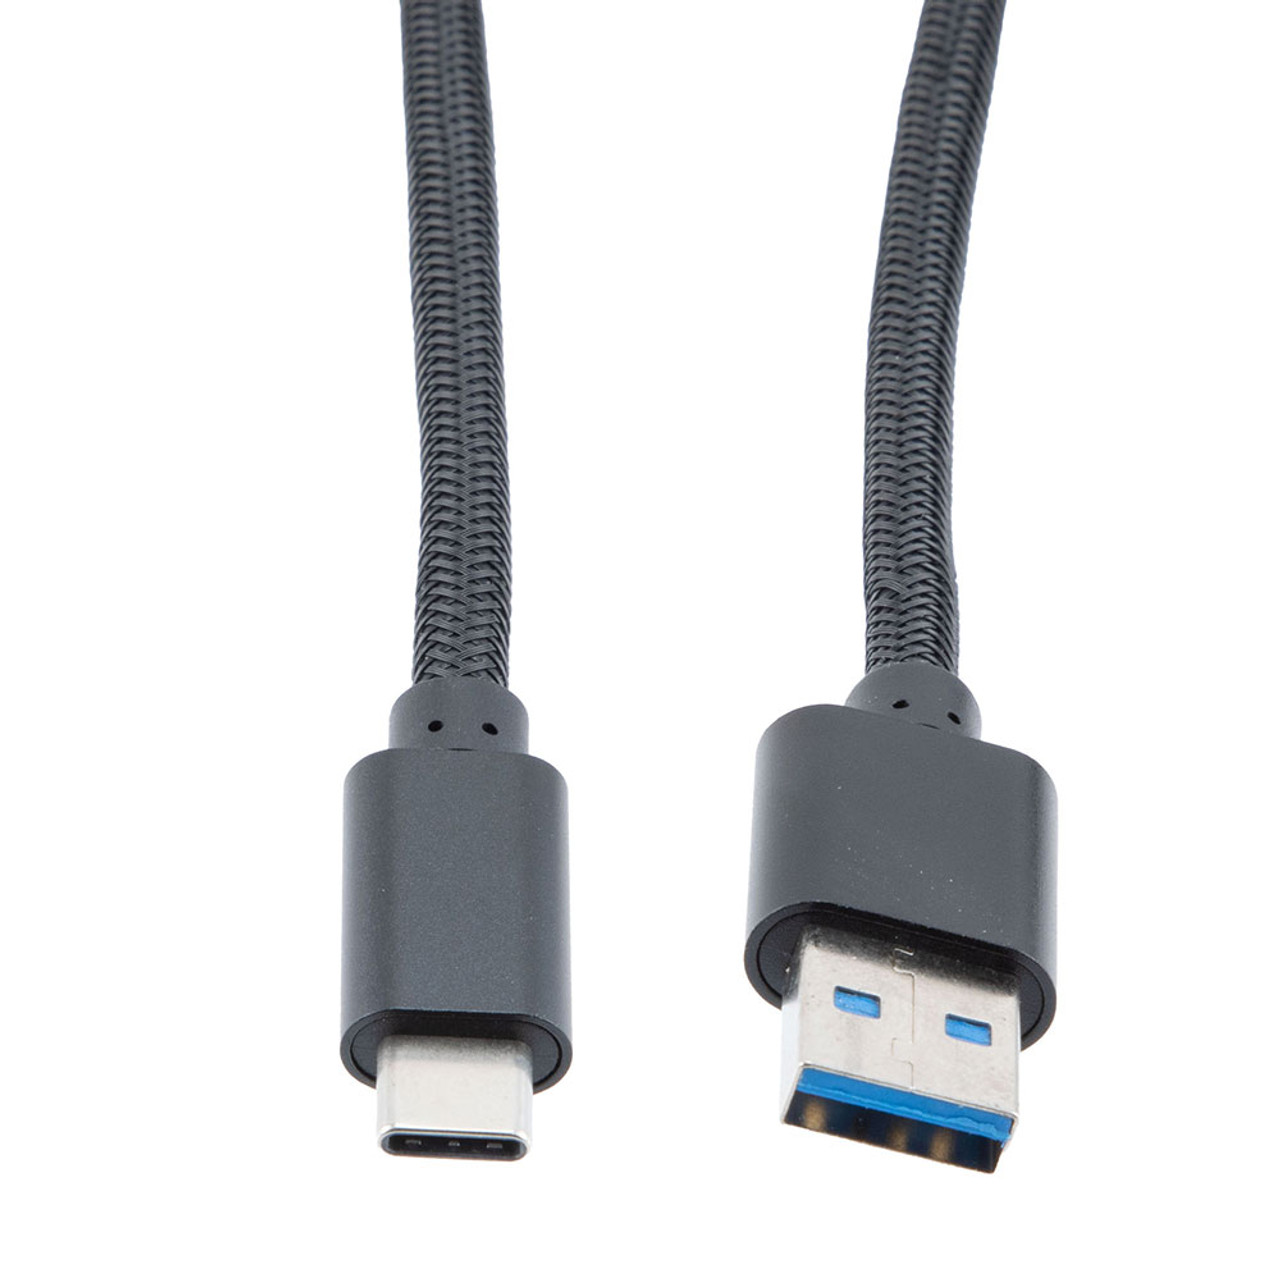 USB 3.0 type A Male to type C Male - 3, 6, and 10 feet